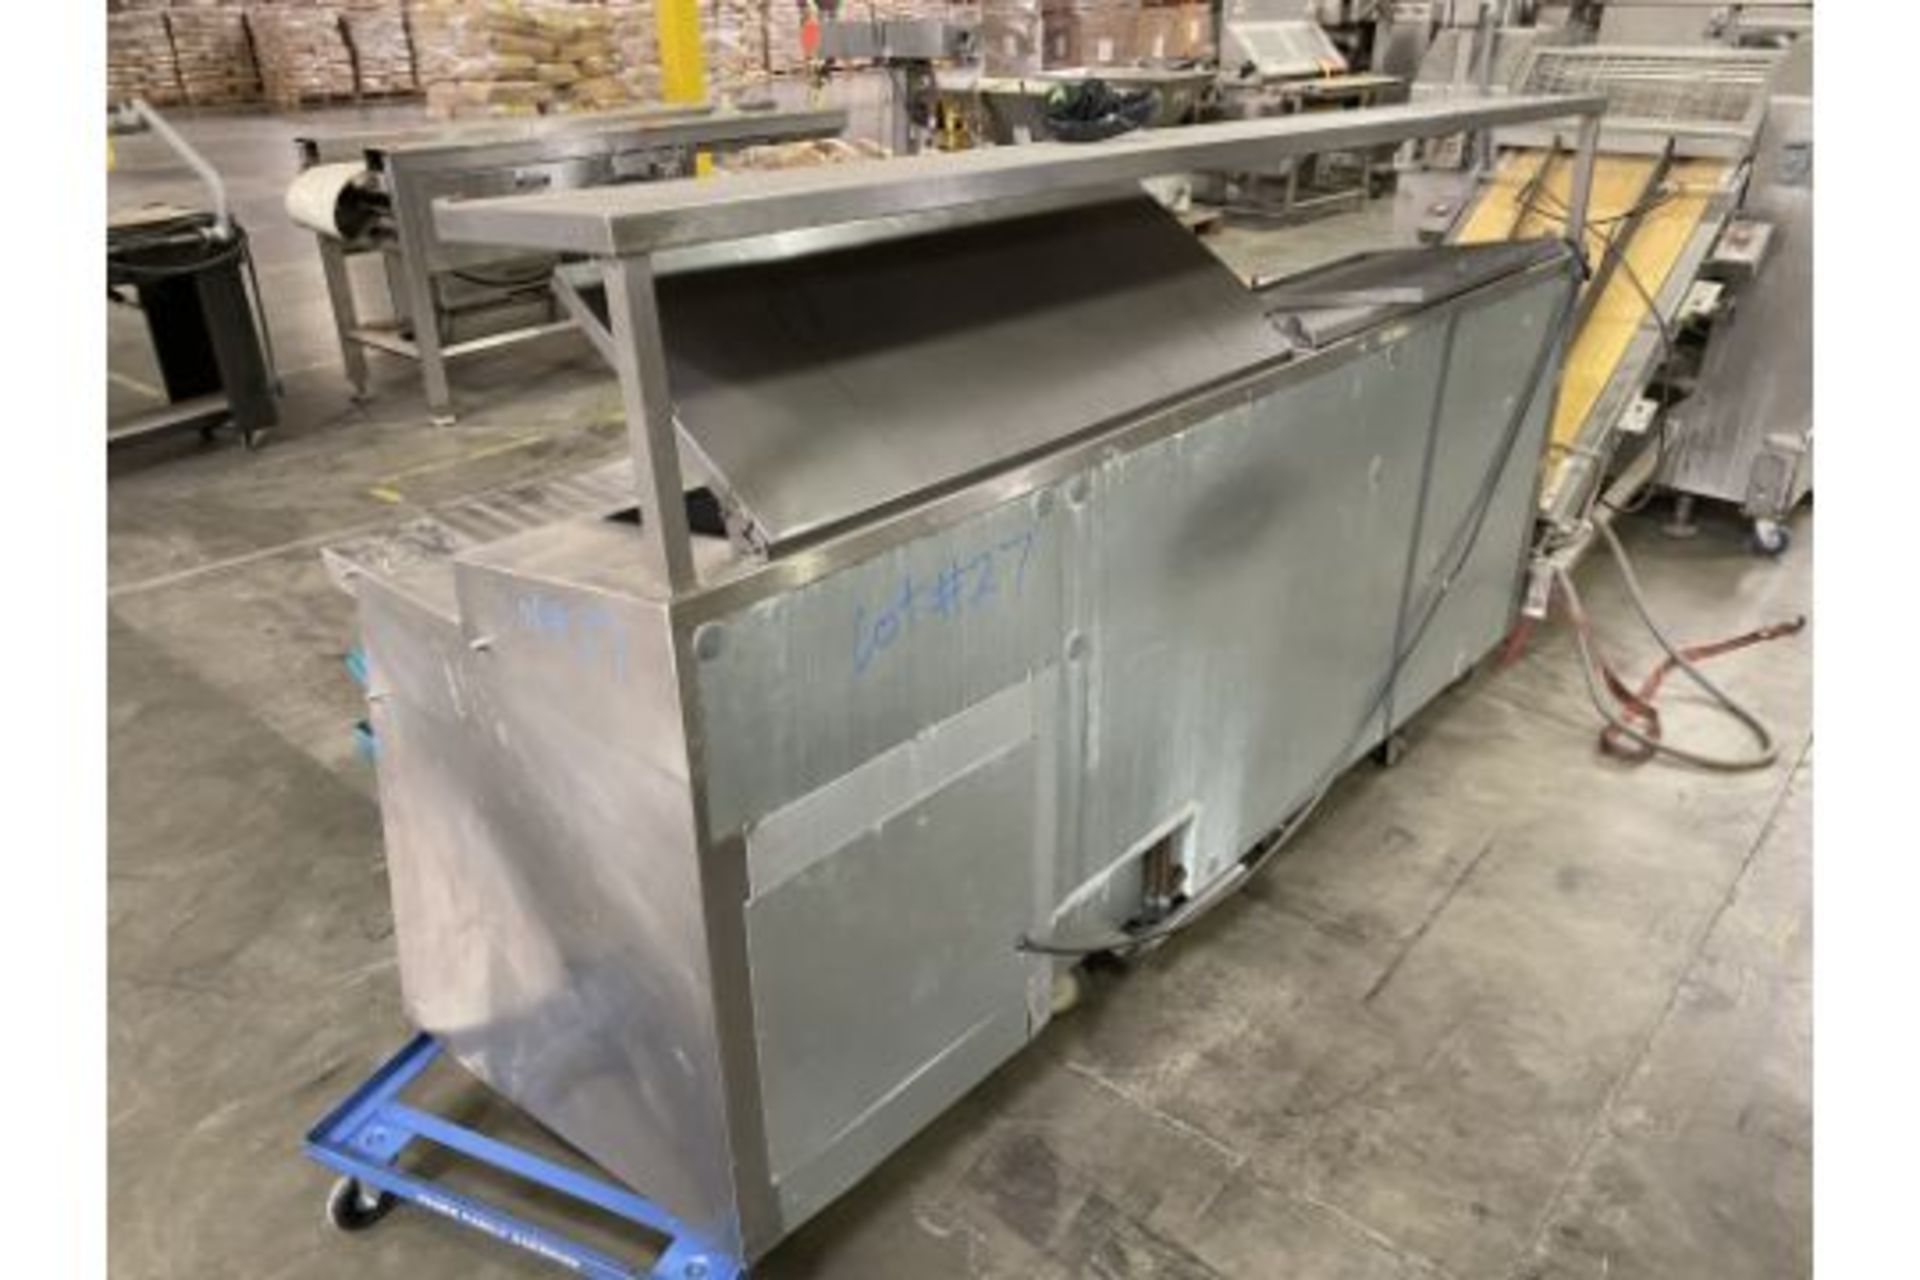 Kairak Portable Cold Box, 3-Door with Top Counter, Rigging/Loading Fee $50 - Image 3 of 3